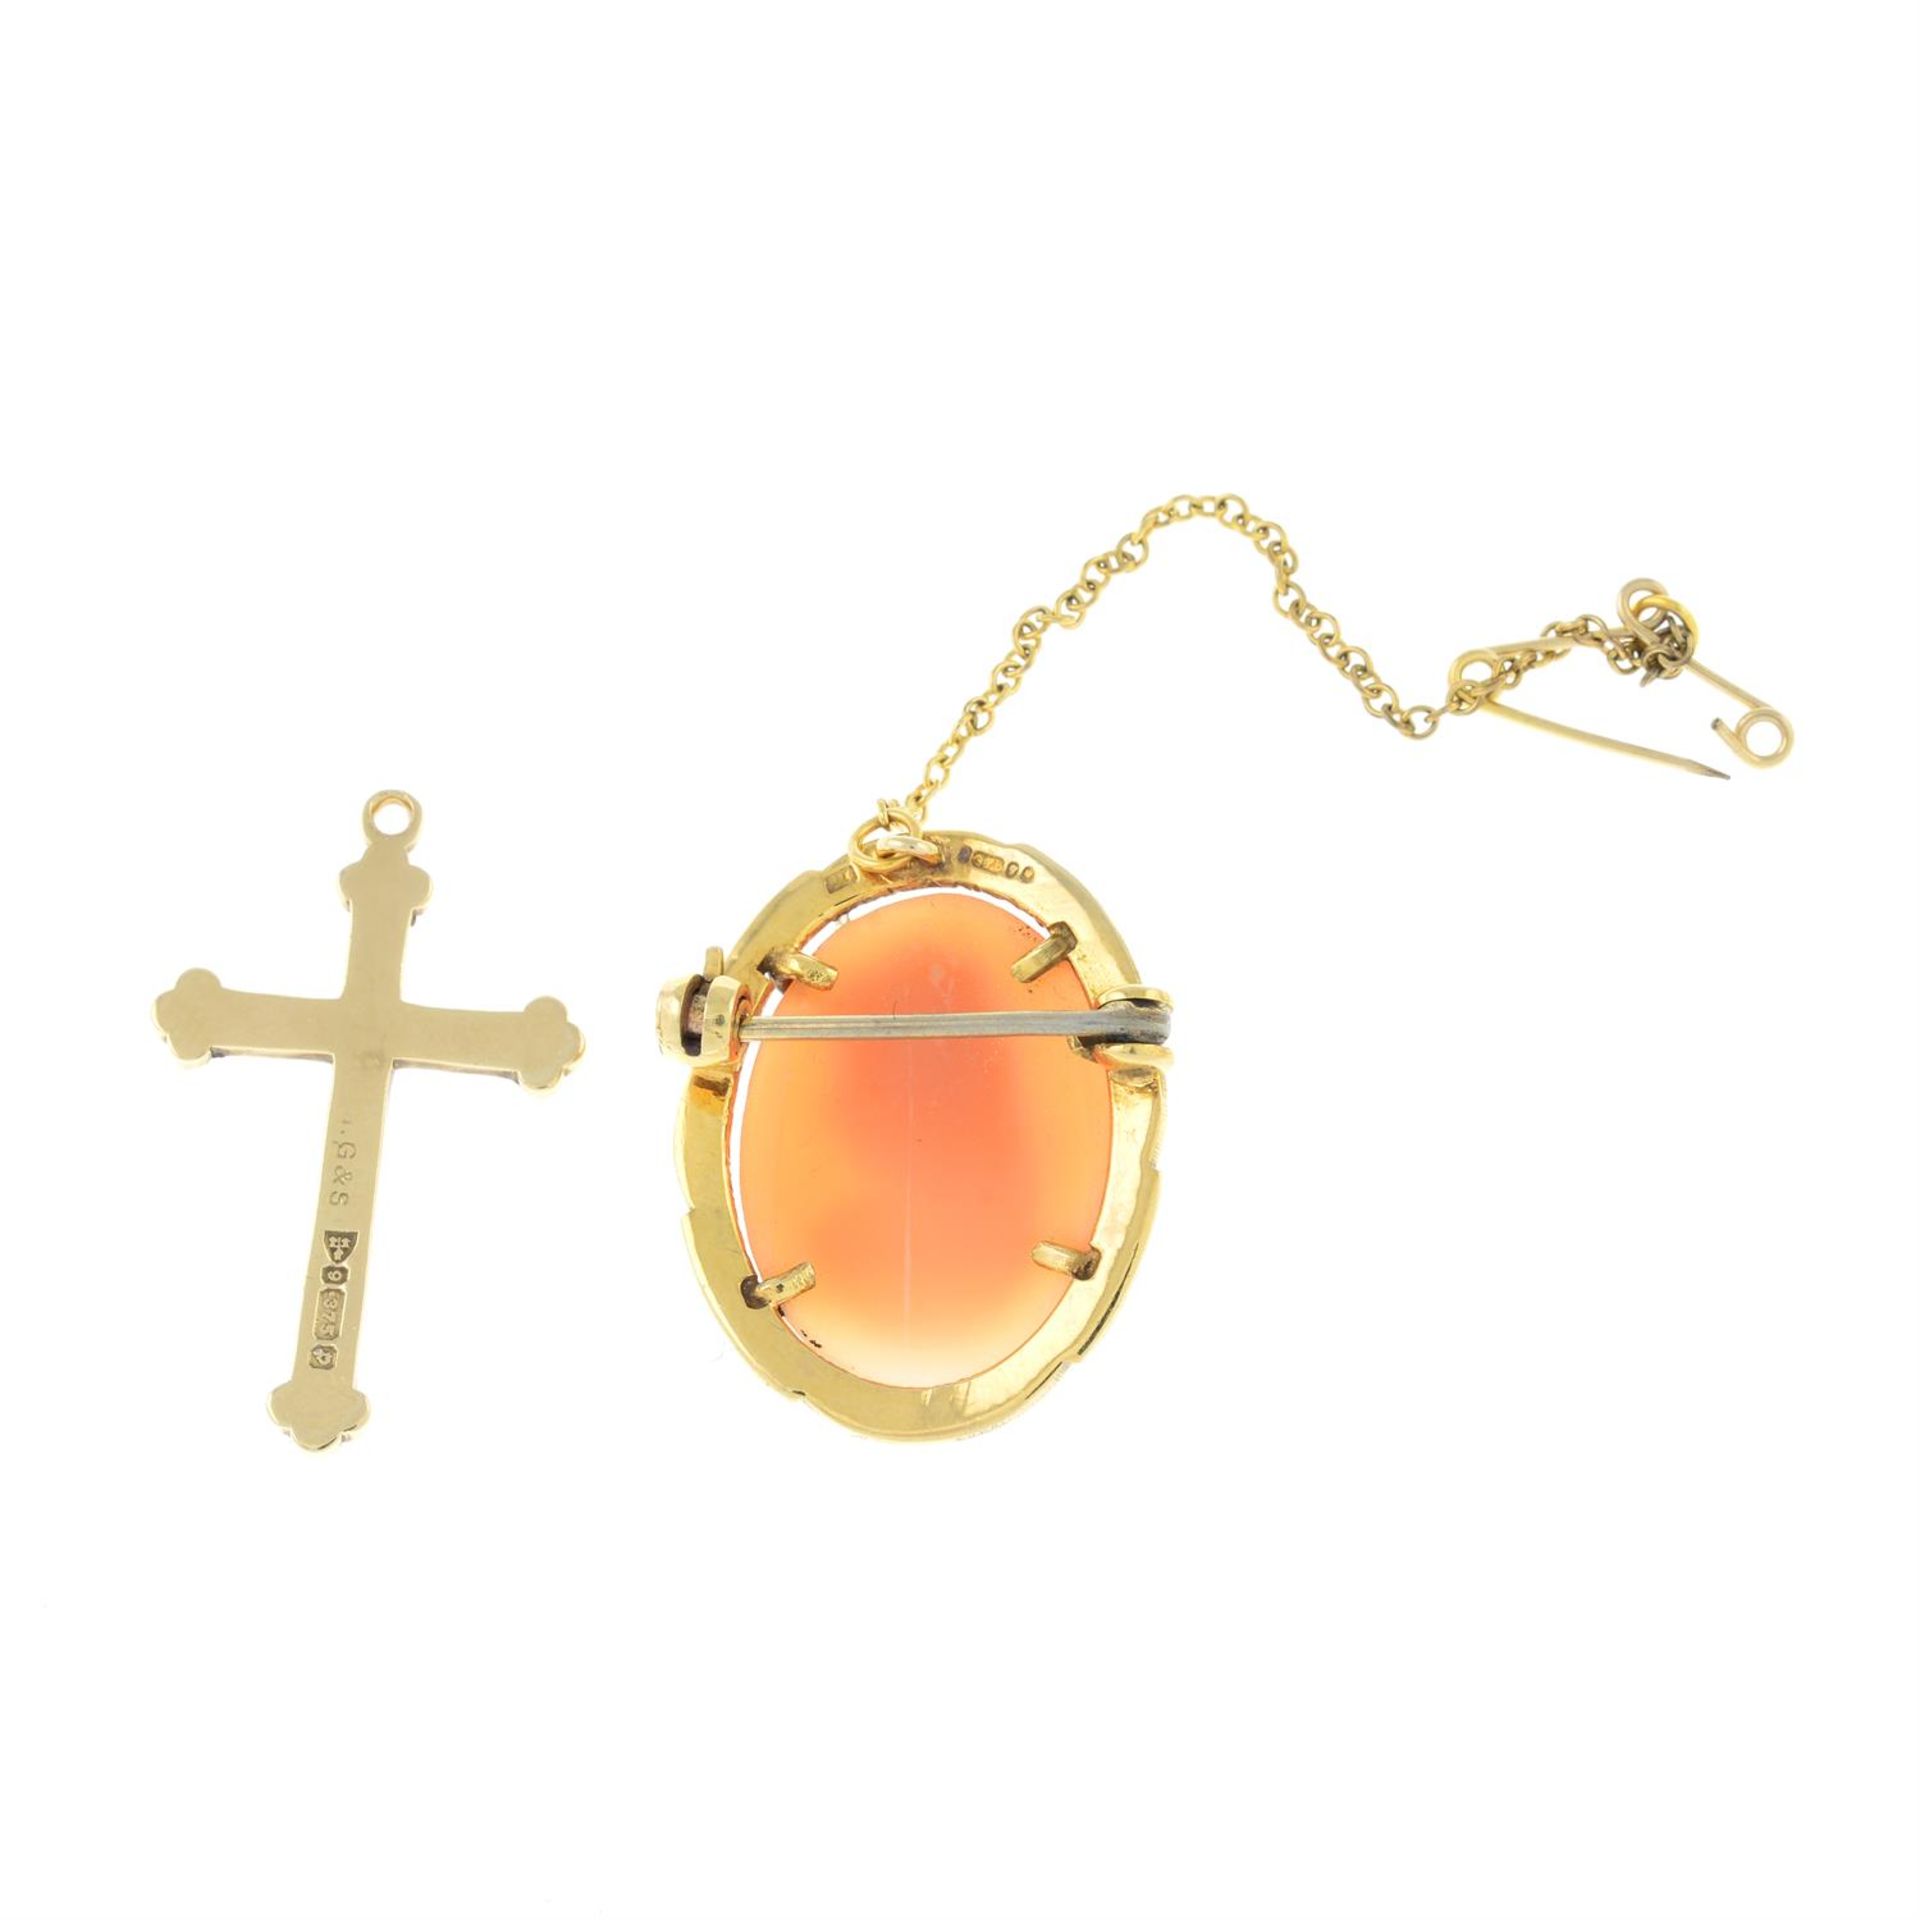 A 9ct gold shell cameo brooch and a 9ct gold cross pendant. - Image 2 of 2